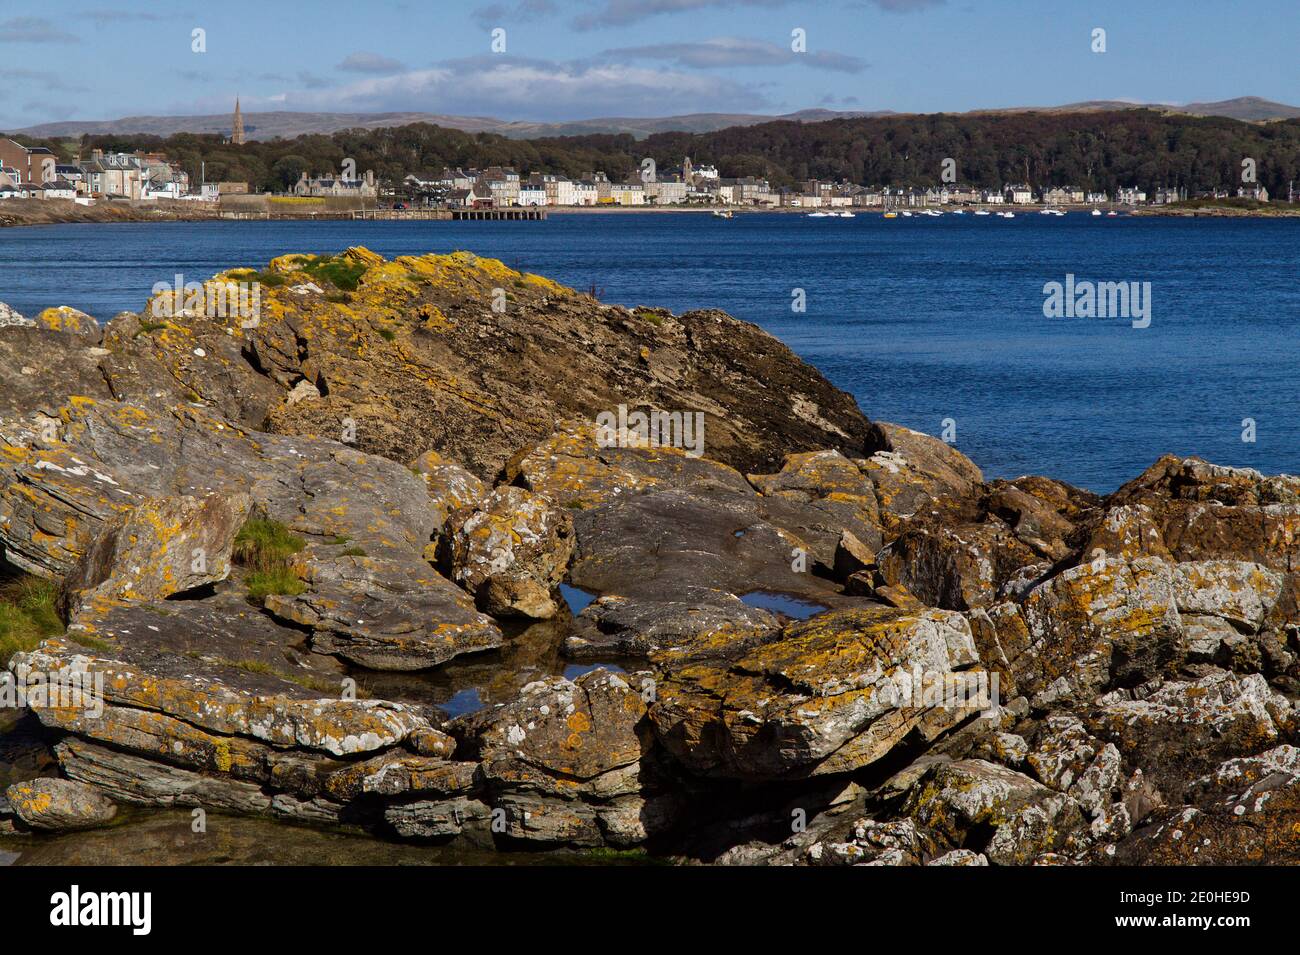 A view of a colourful, lichen covered, intertidal rock at Millport, Isle of Cumbrae, Scotland Stock Photo